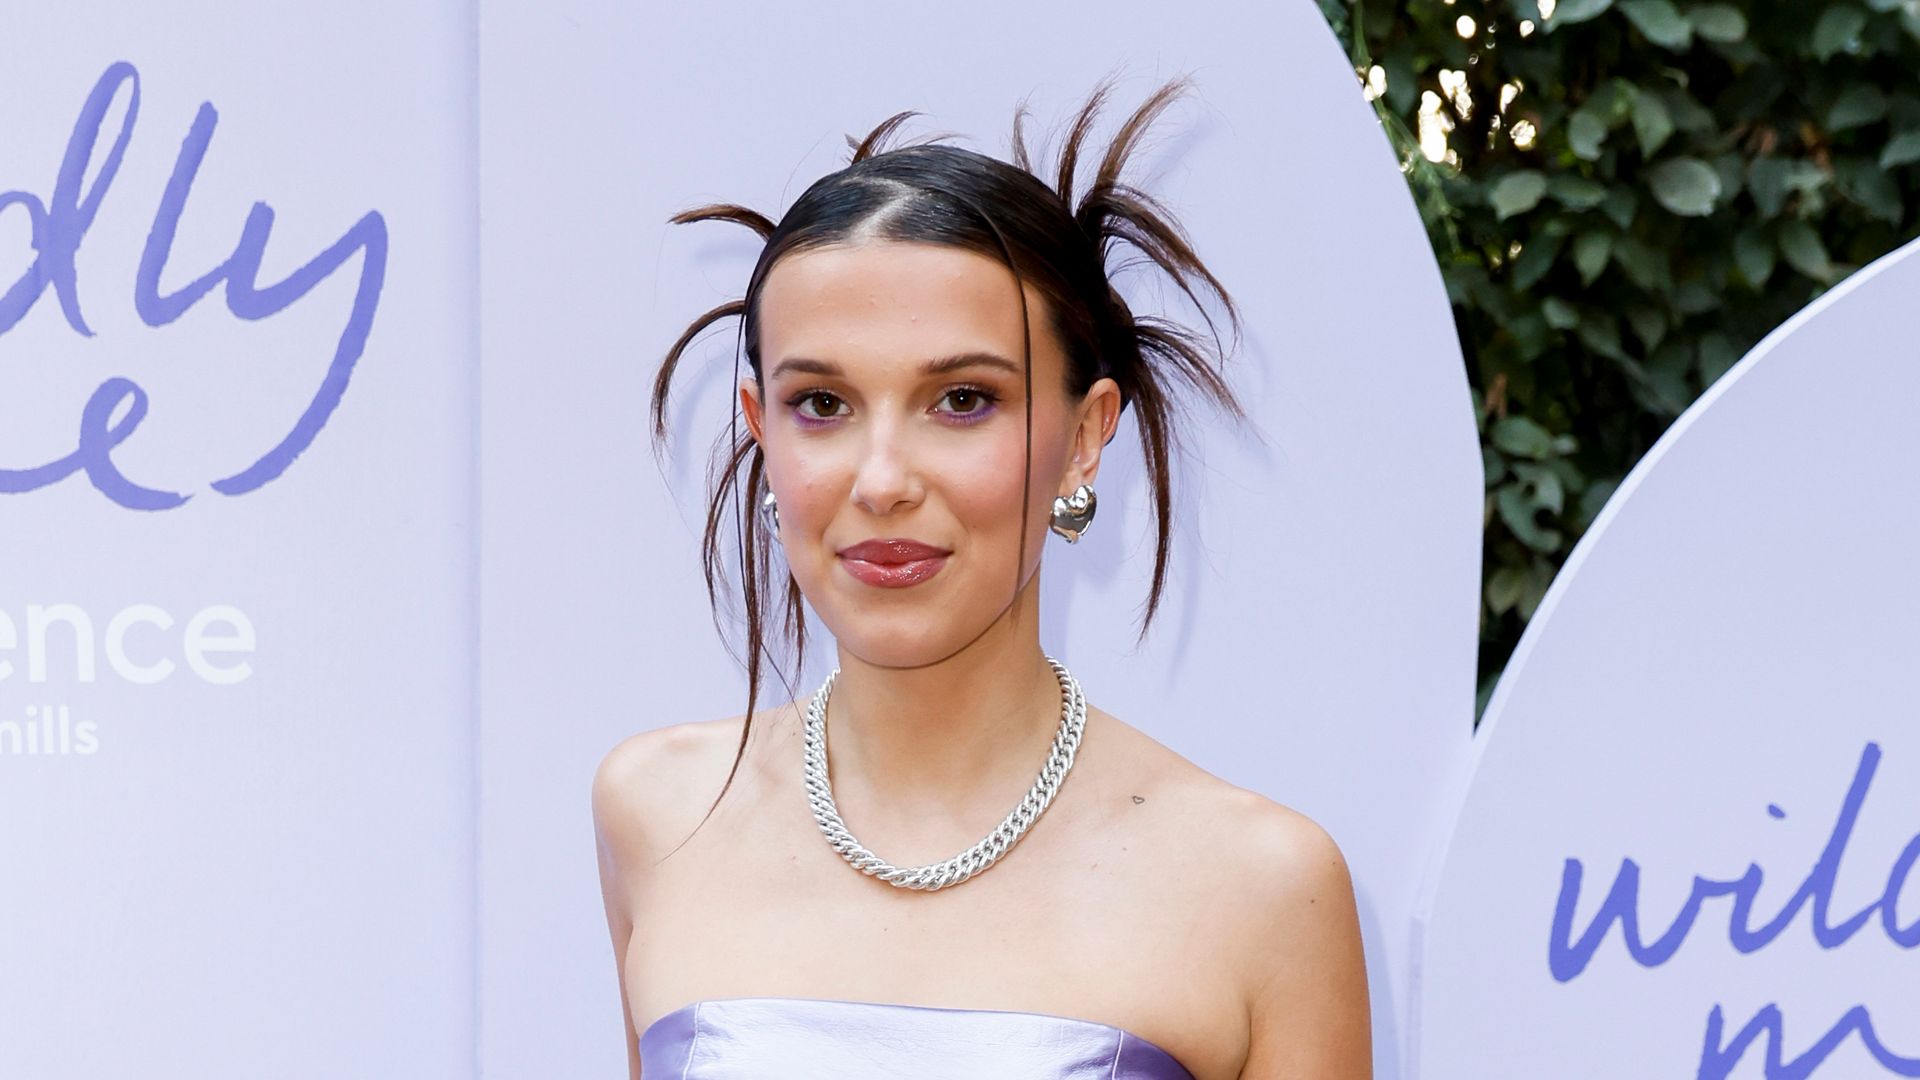 Millie Bobby Brown Dazzles in Pink Dress for 'Enola Holmes 2